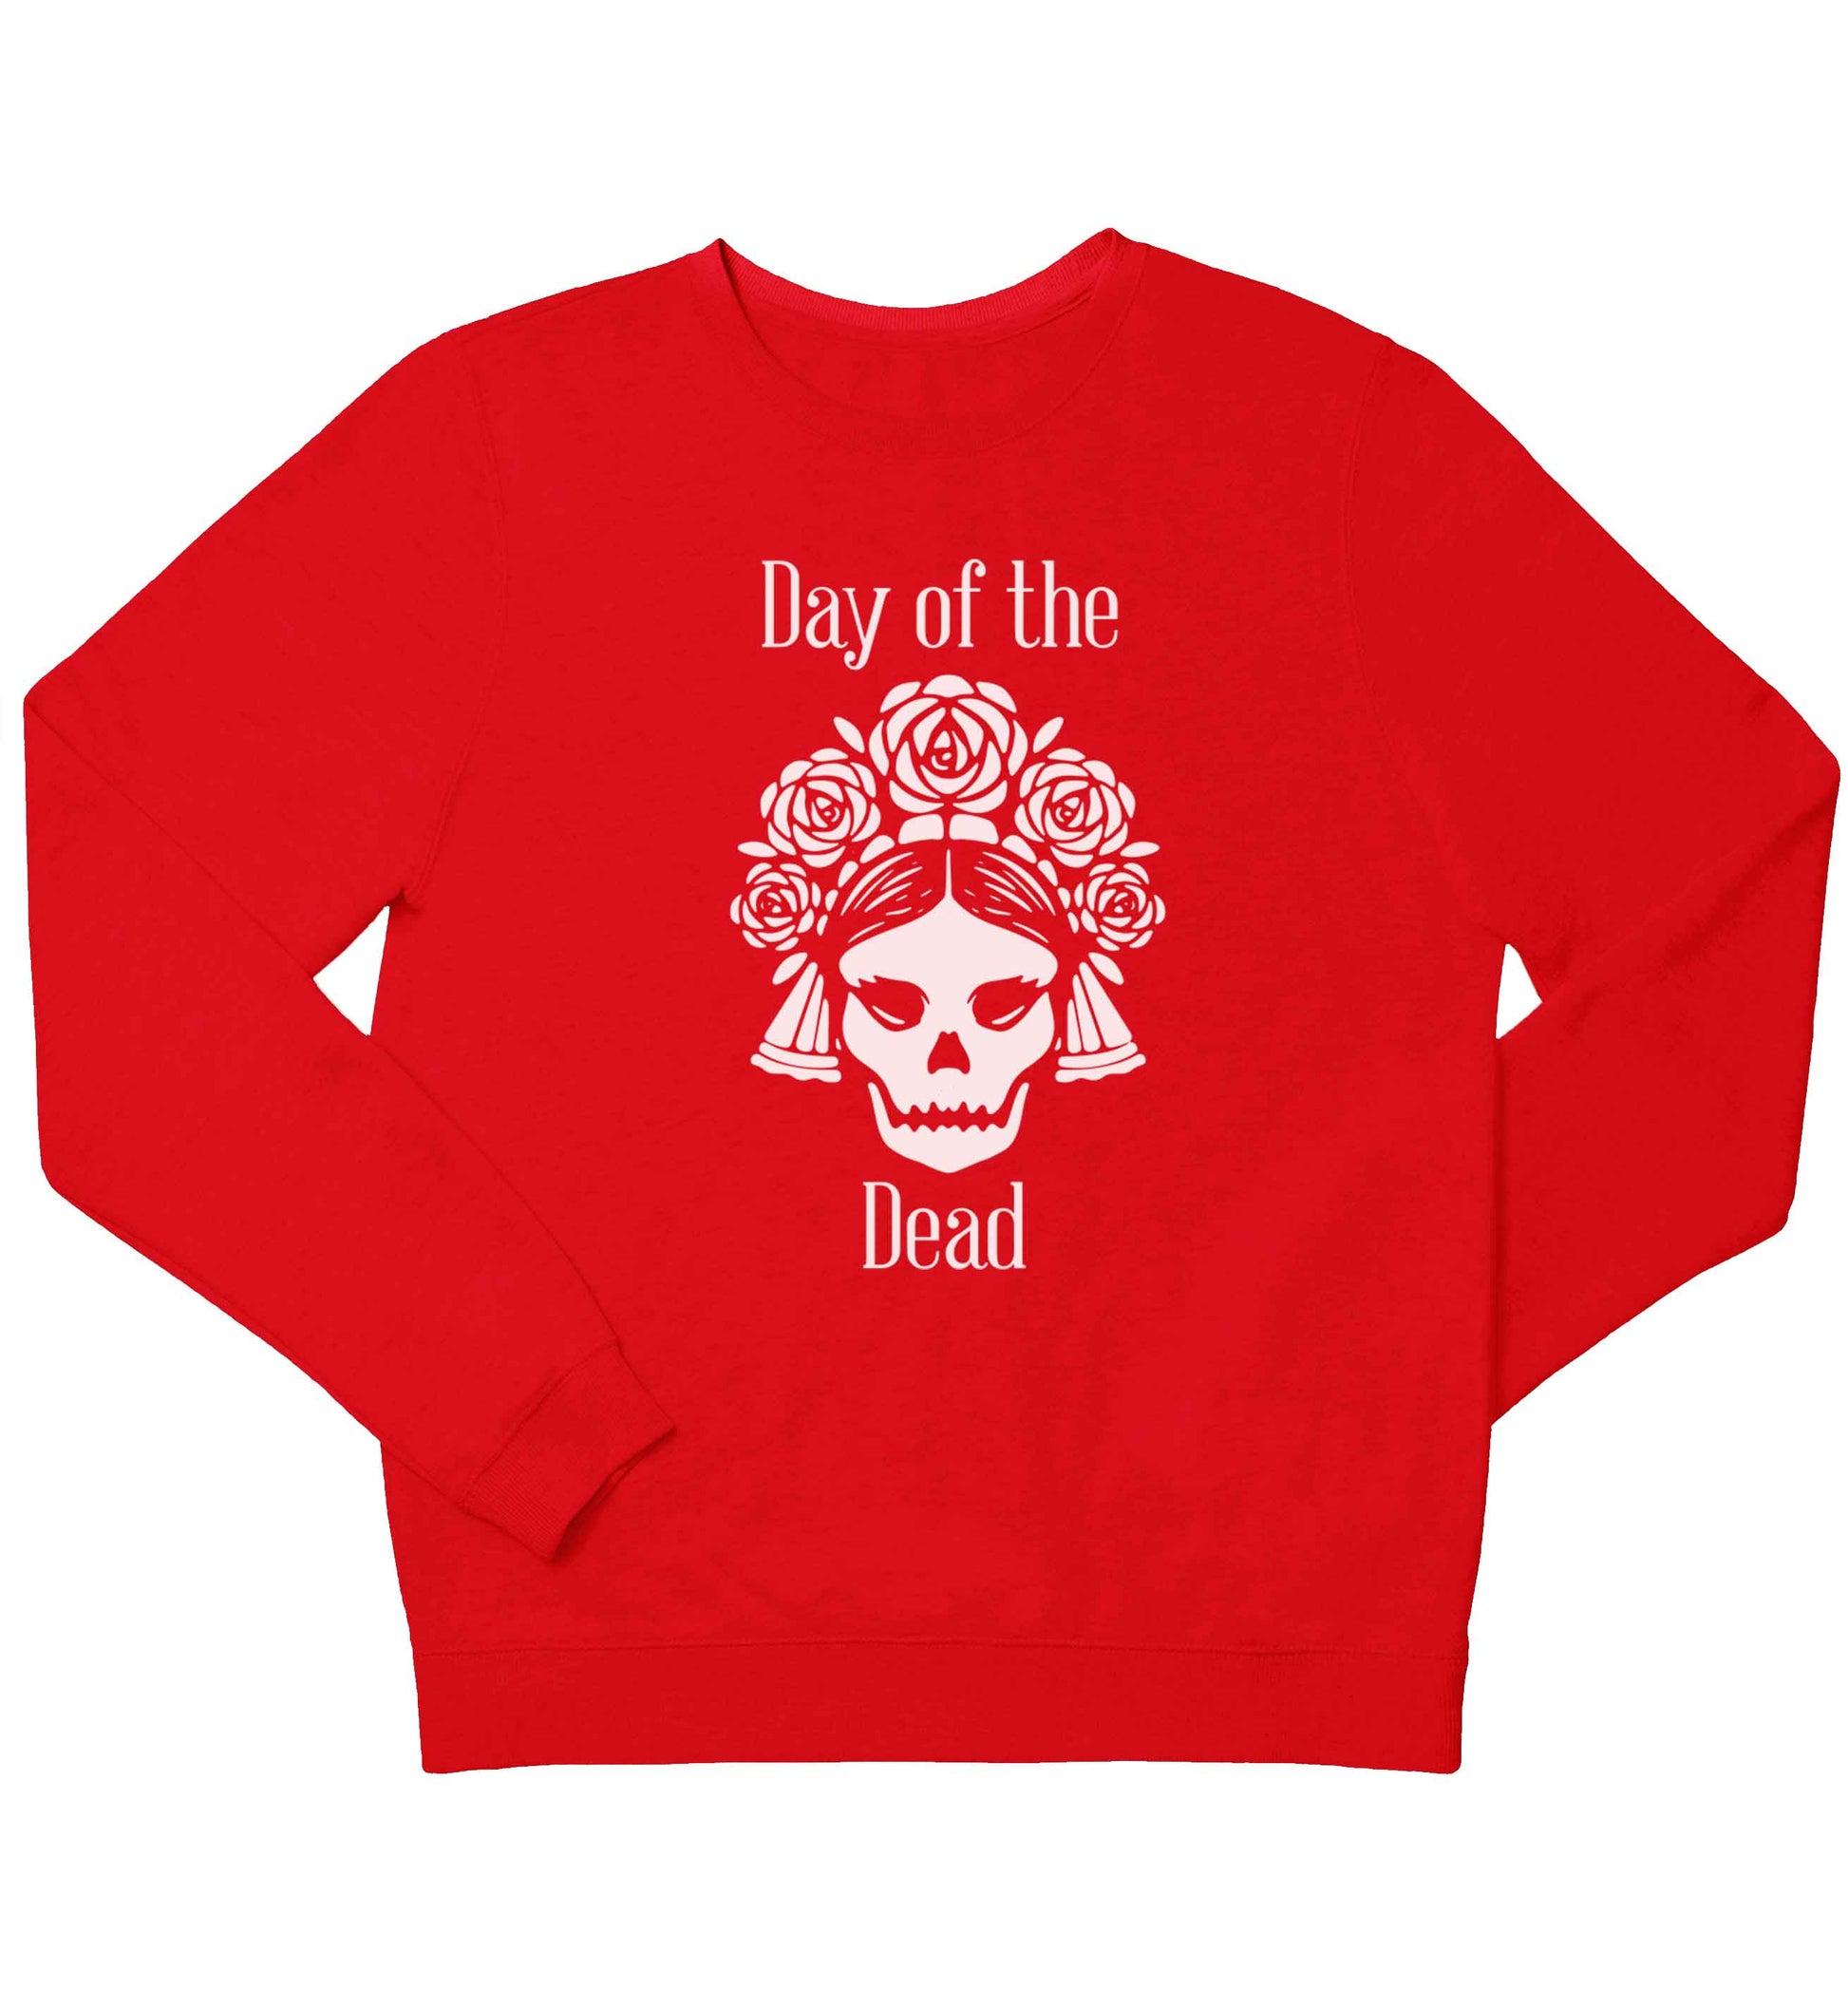 Day of the dead children's grey sweater 12-13 Years